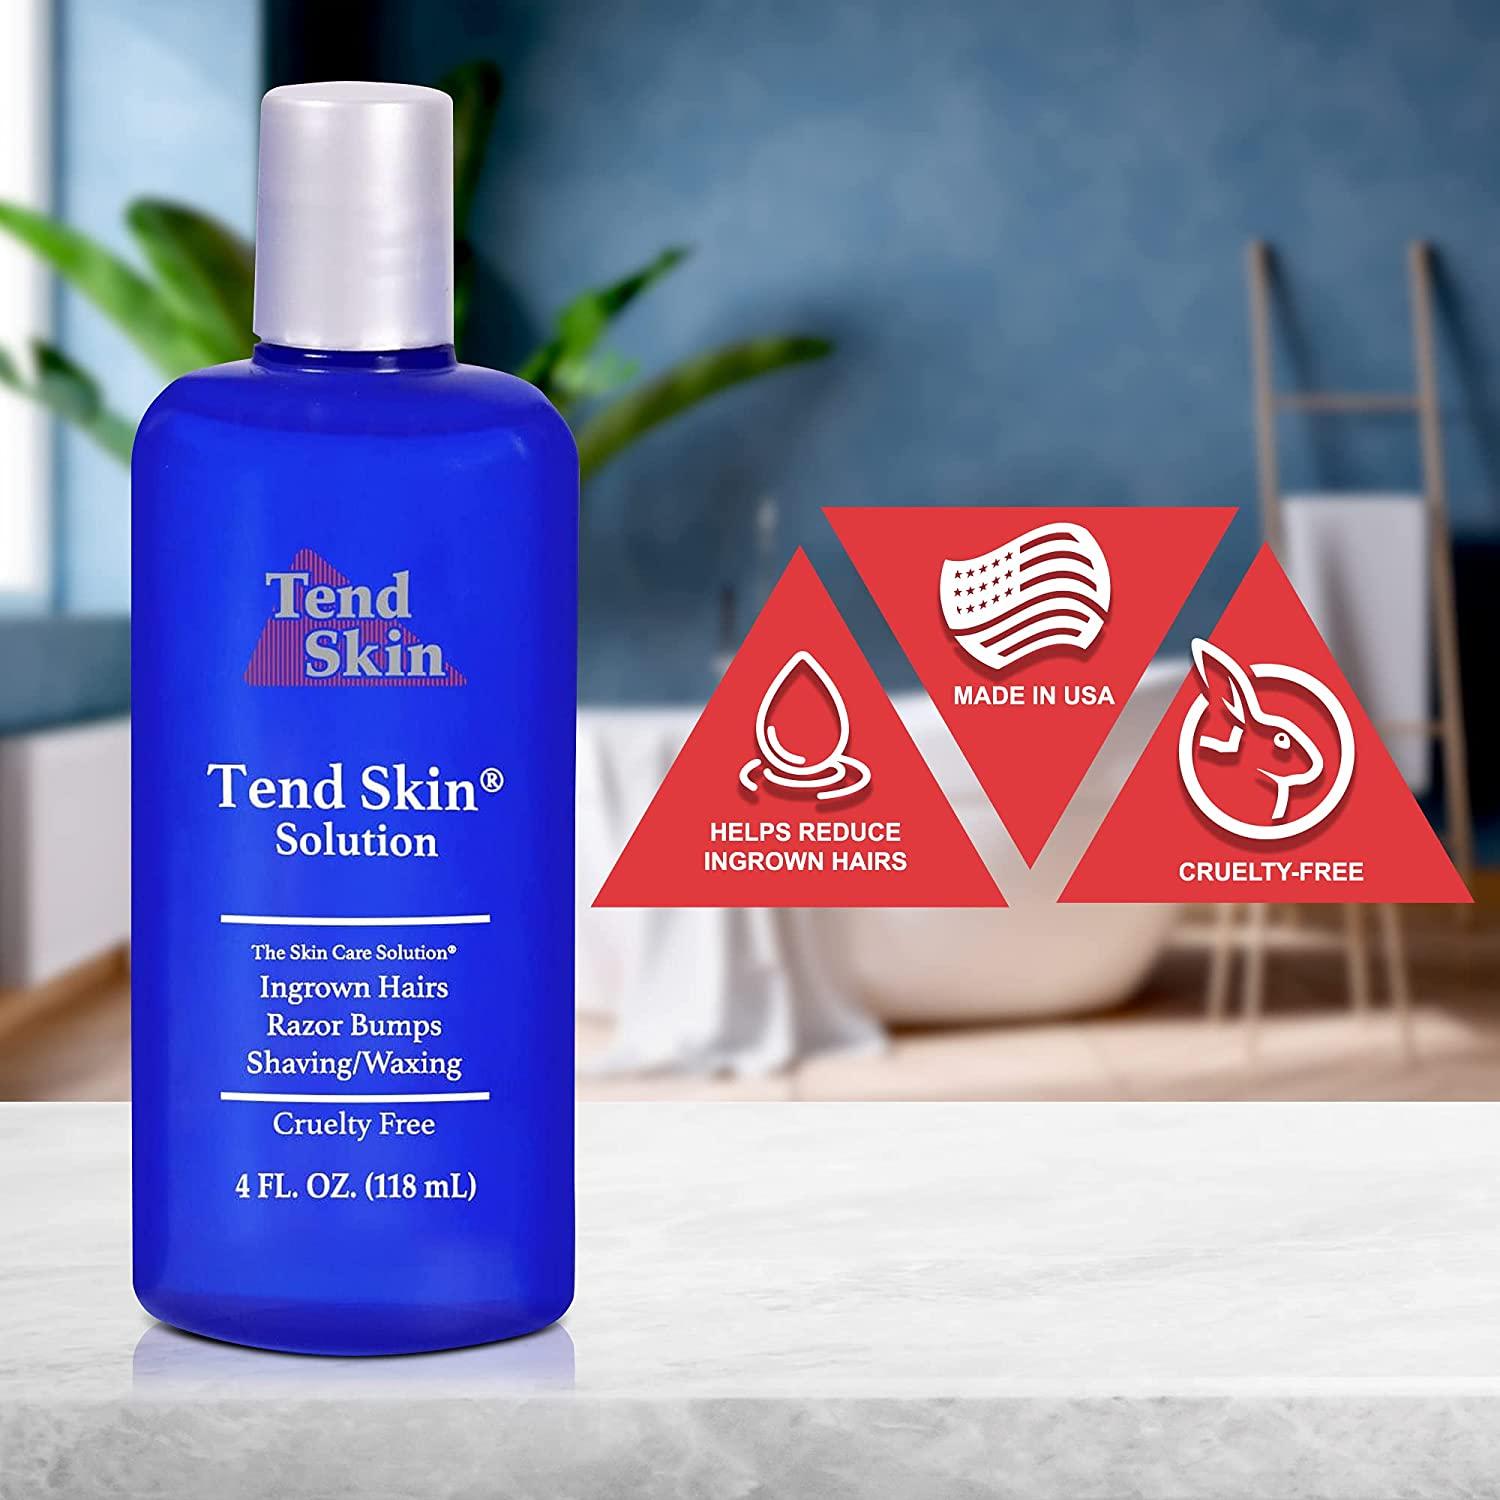 Tendskin is in Kenya.Have you suffered from bumps after waxing